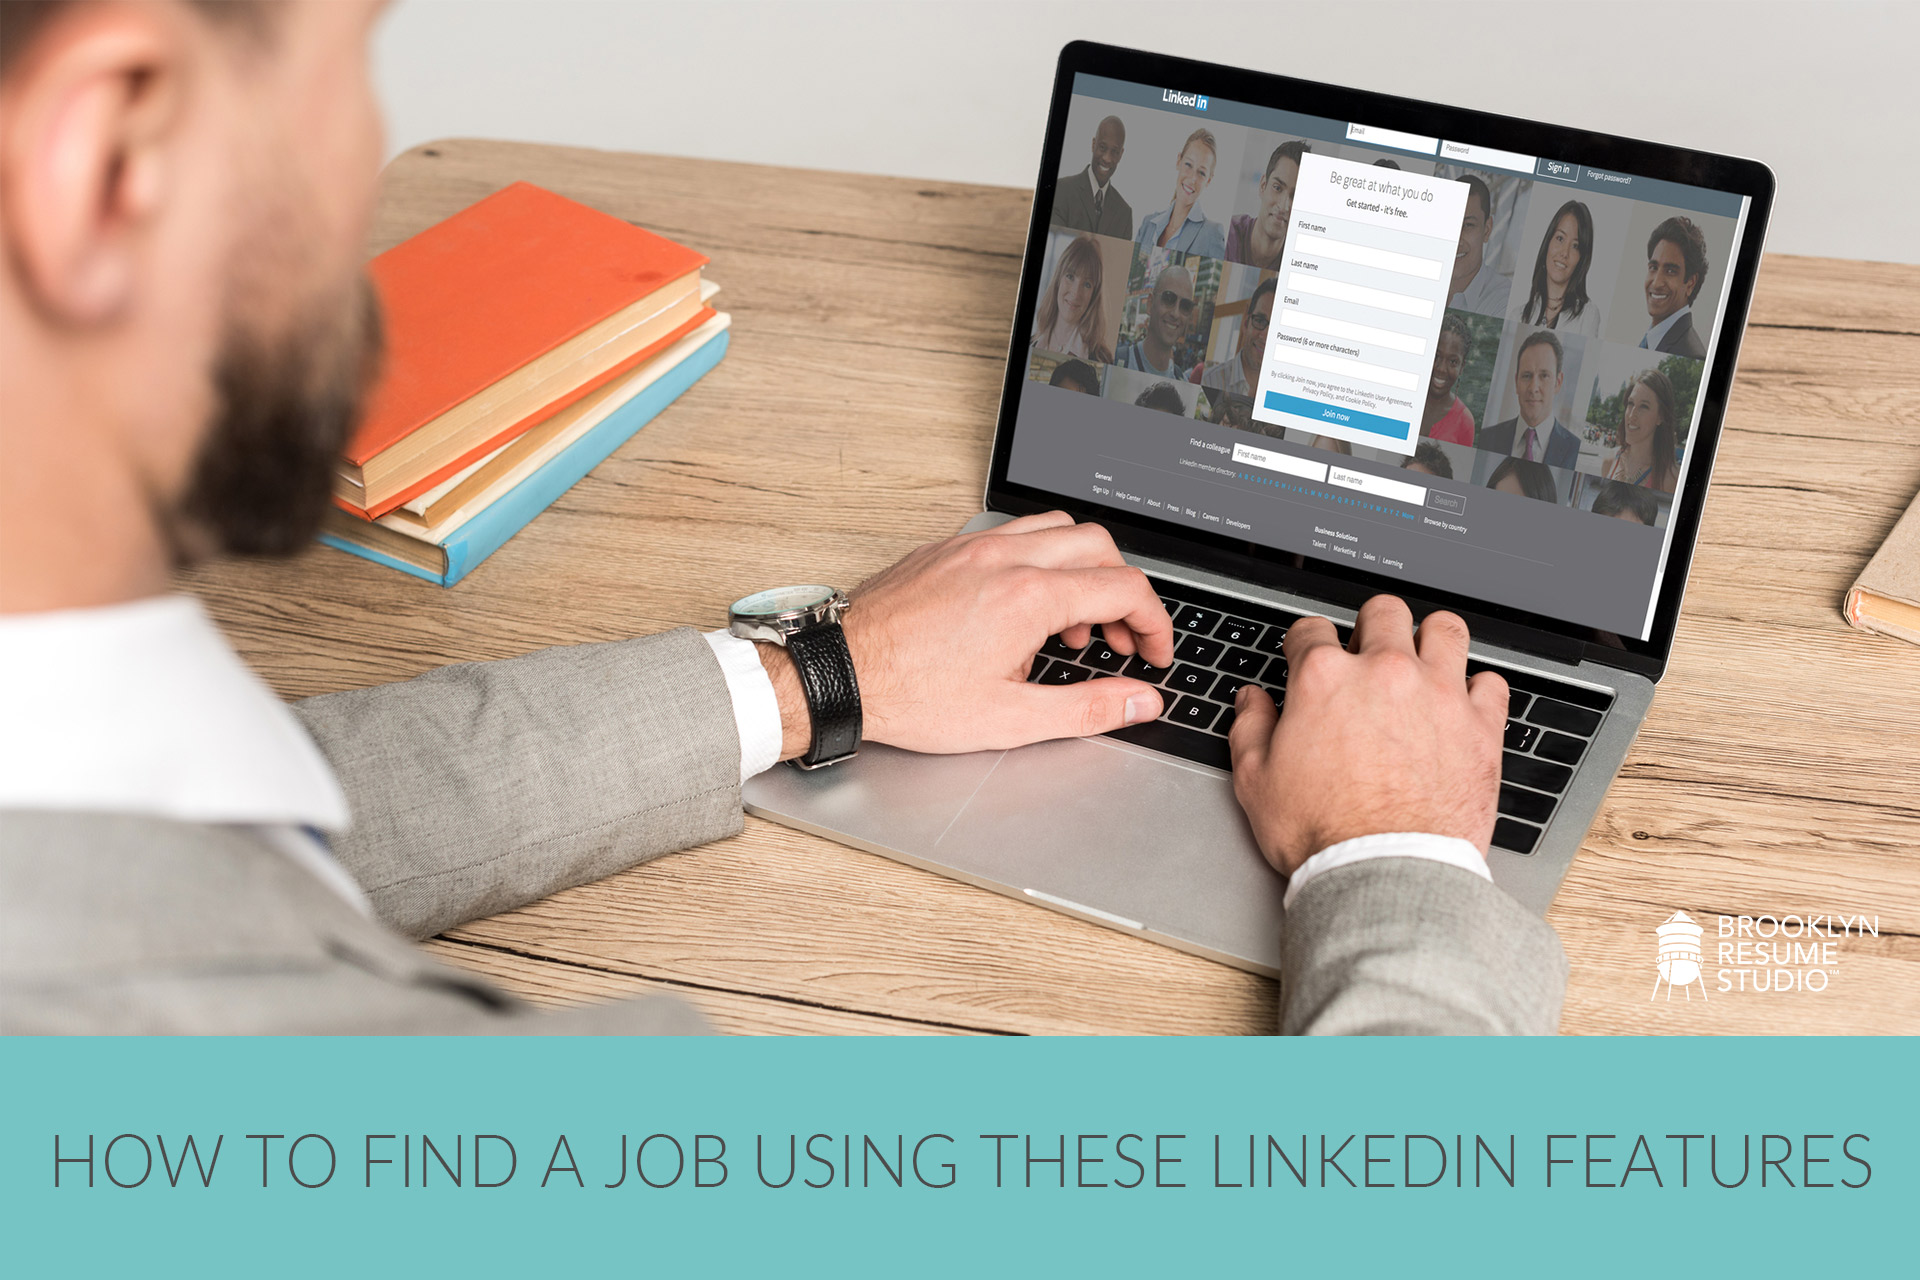 Job Seekers: How to Find a Job Using These LinkedIn Features